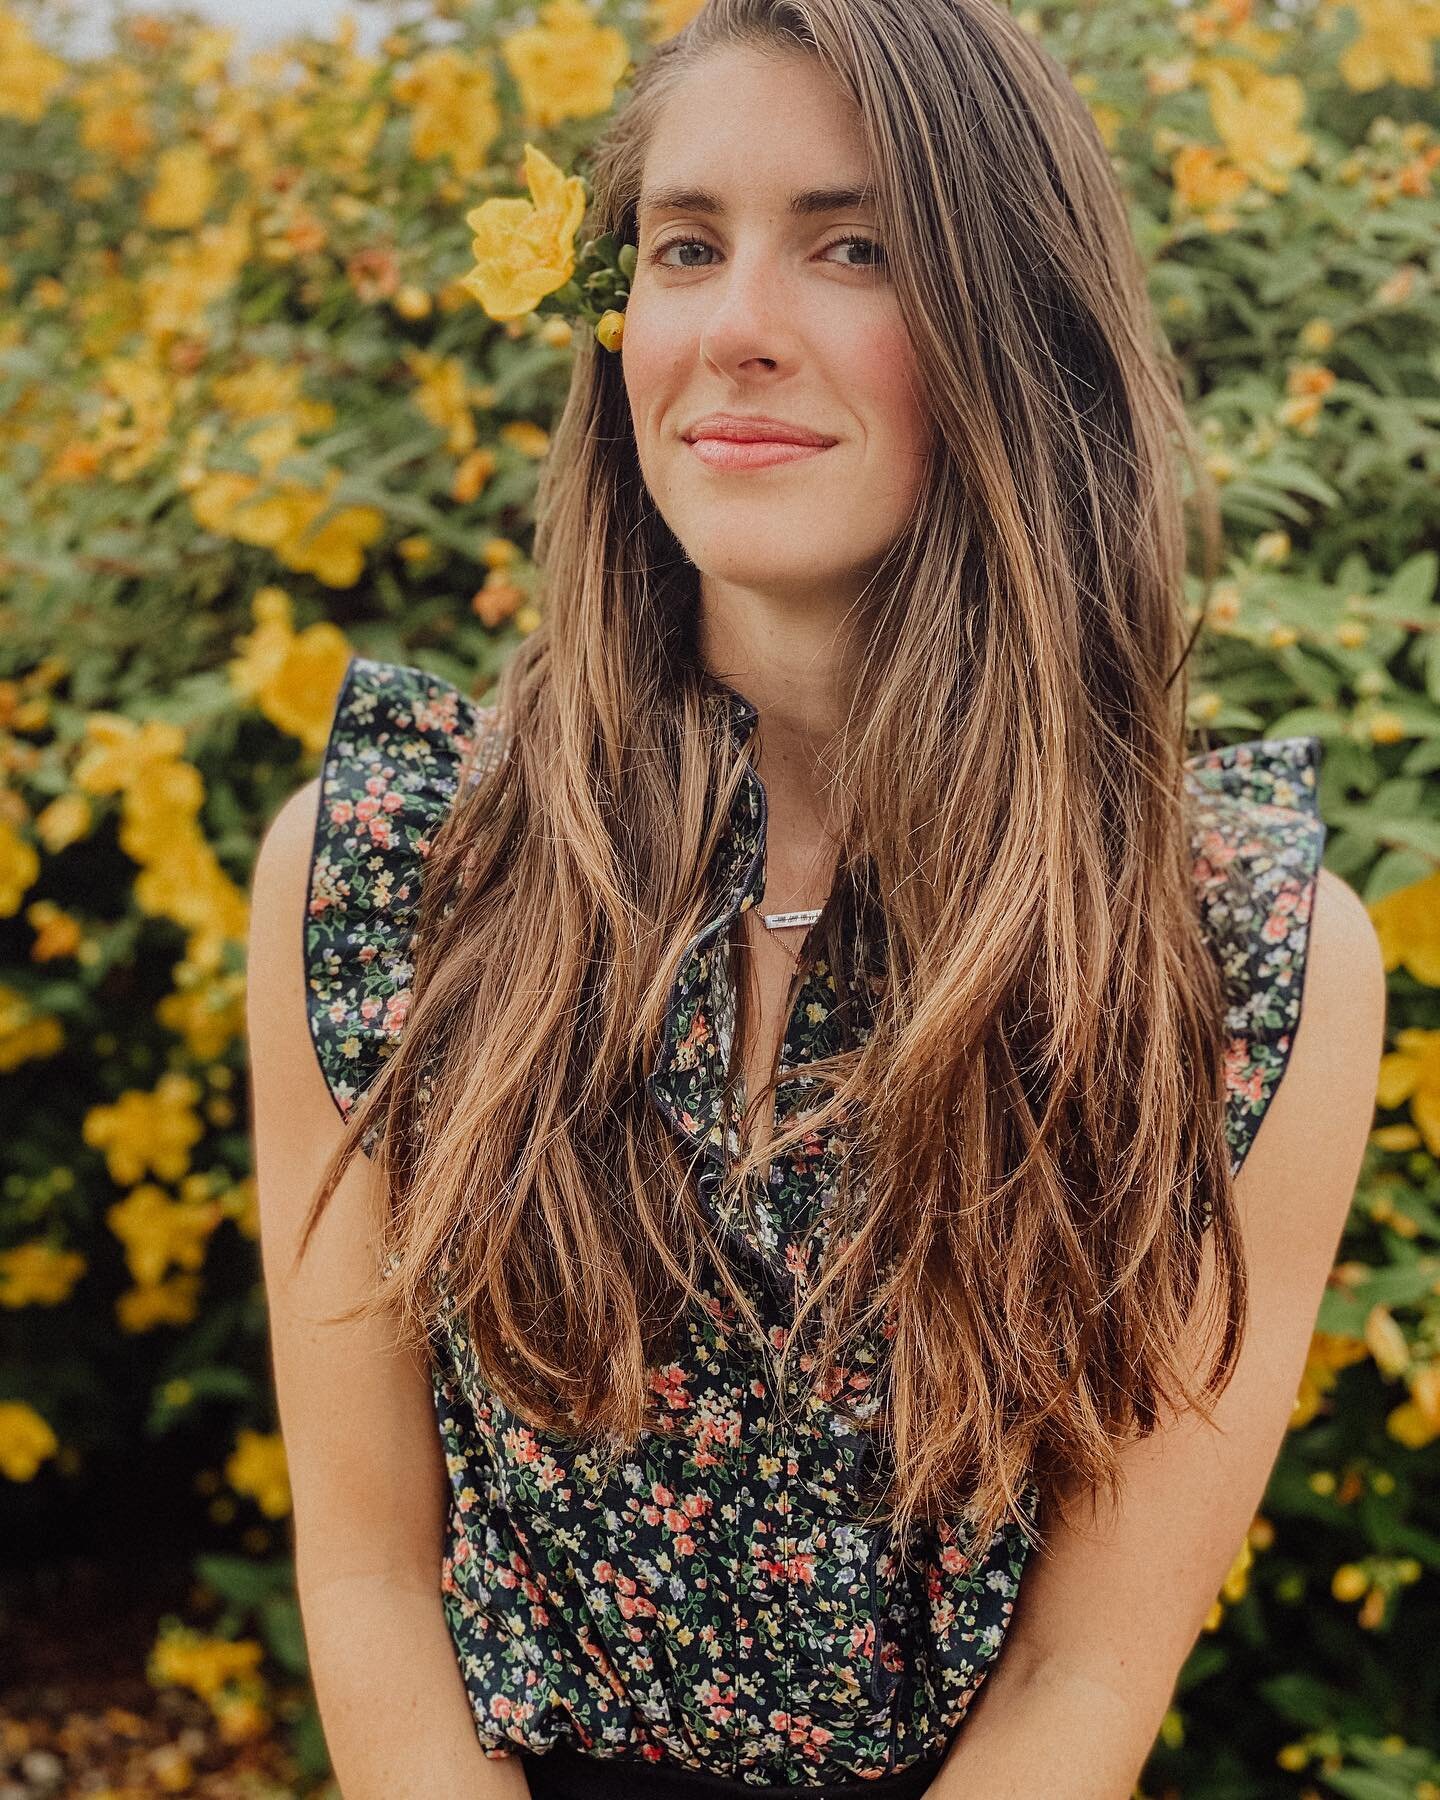 I&rsquo;ve been quite lately bc things have been blooming behind the scenes. 🌼&gt;&gt; Stay tuned to this space. ✨
...
More importantly... what have you been up to?
Are you gigging? Writing? Learning a cool new tune? Tell me about it.

...
#fiddle #